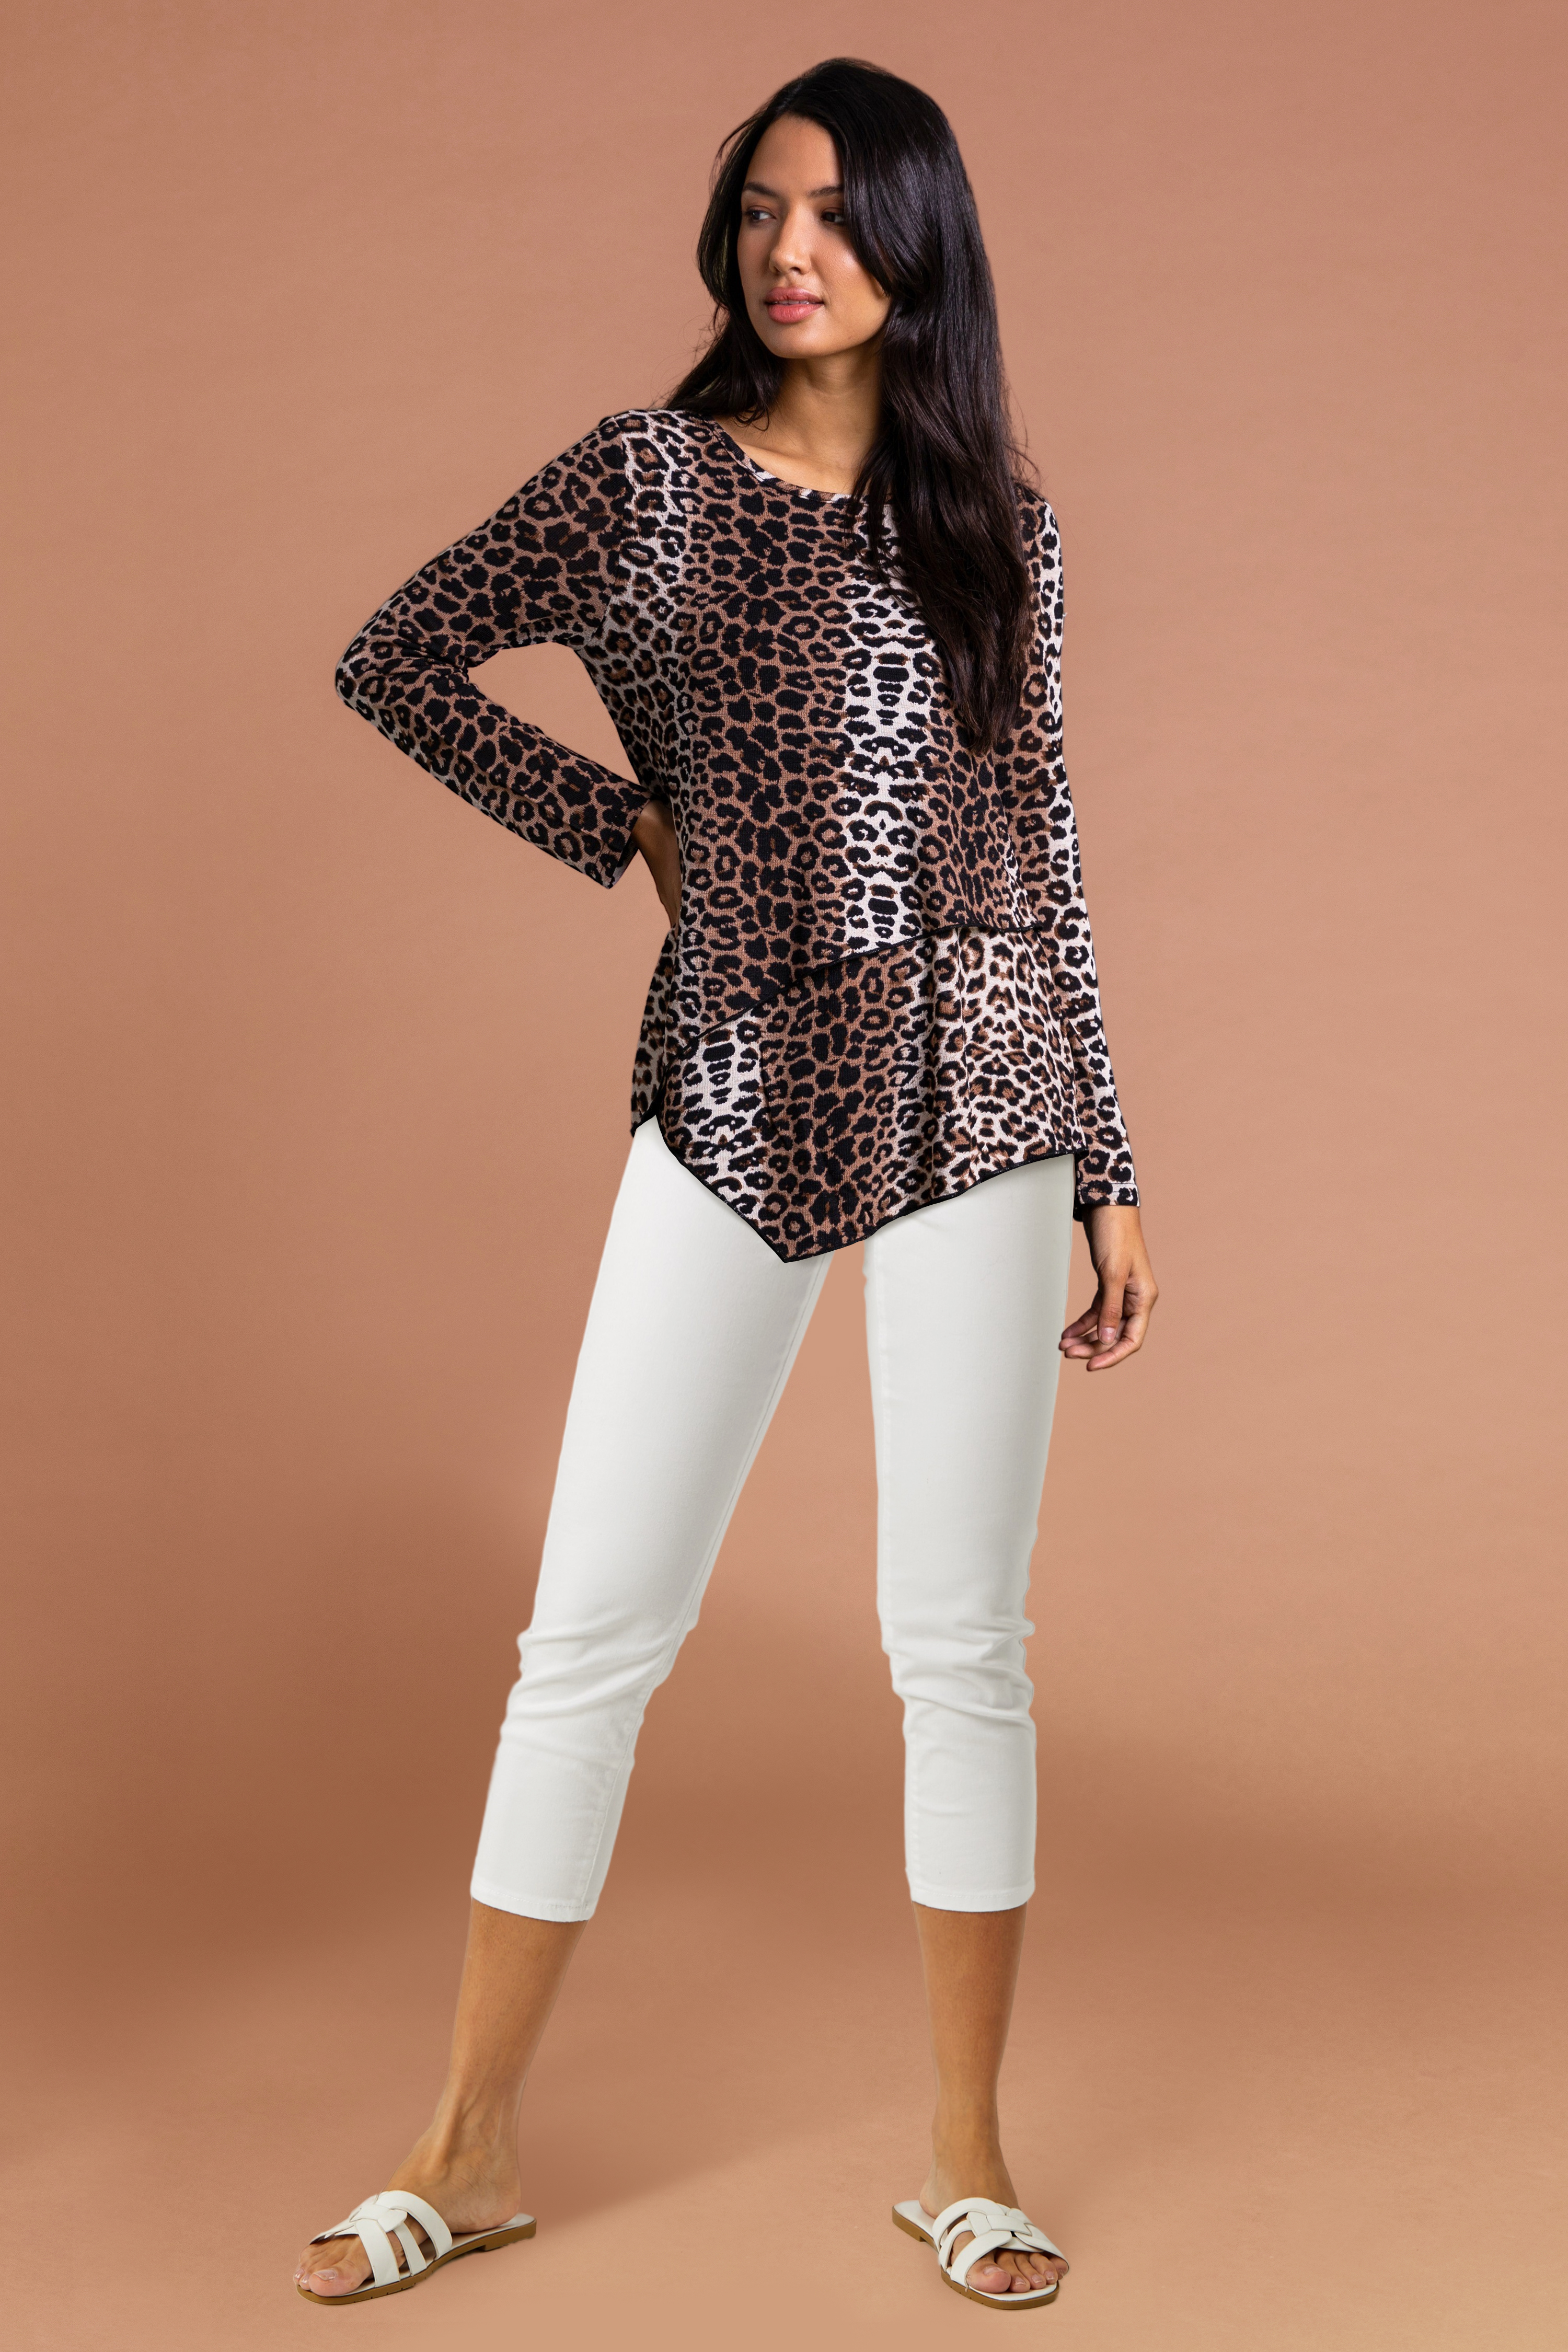 Brown Animal Leopard Print Layered Asymmetric Top , Image 2 of 4